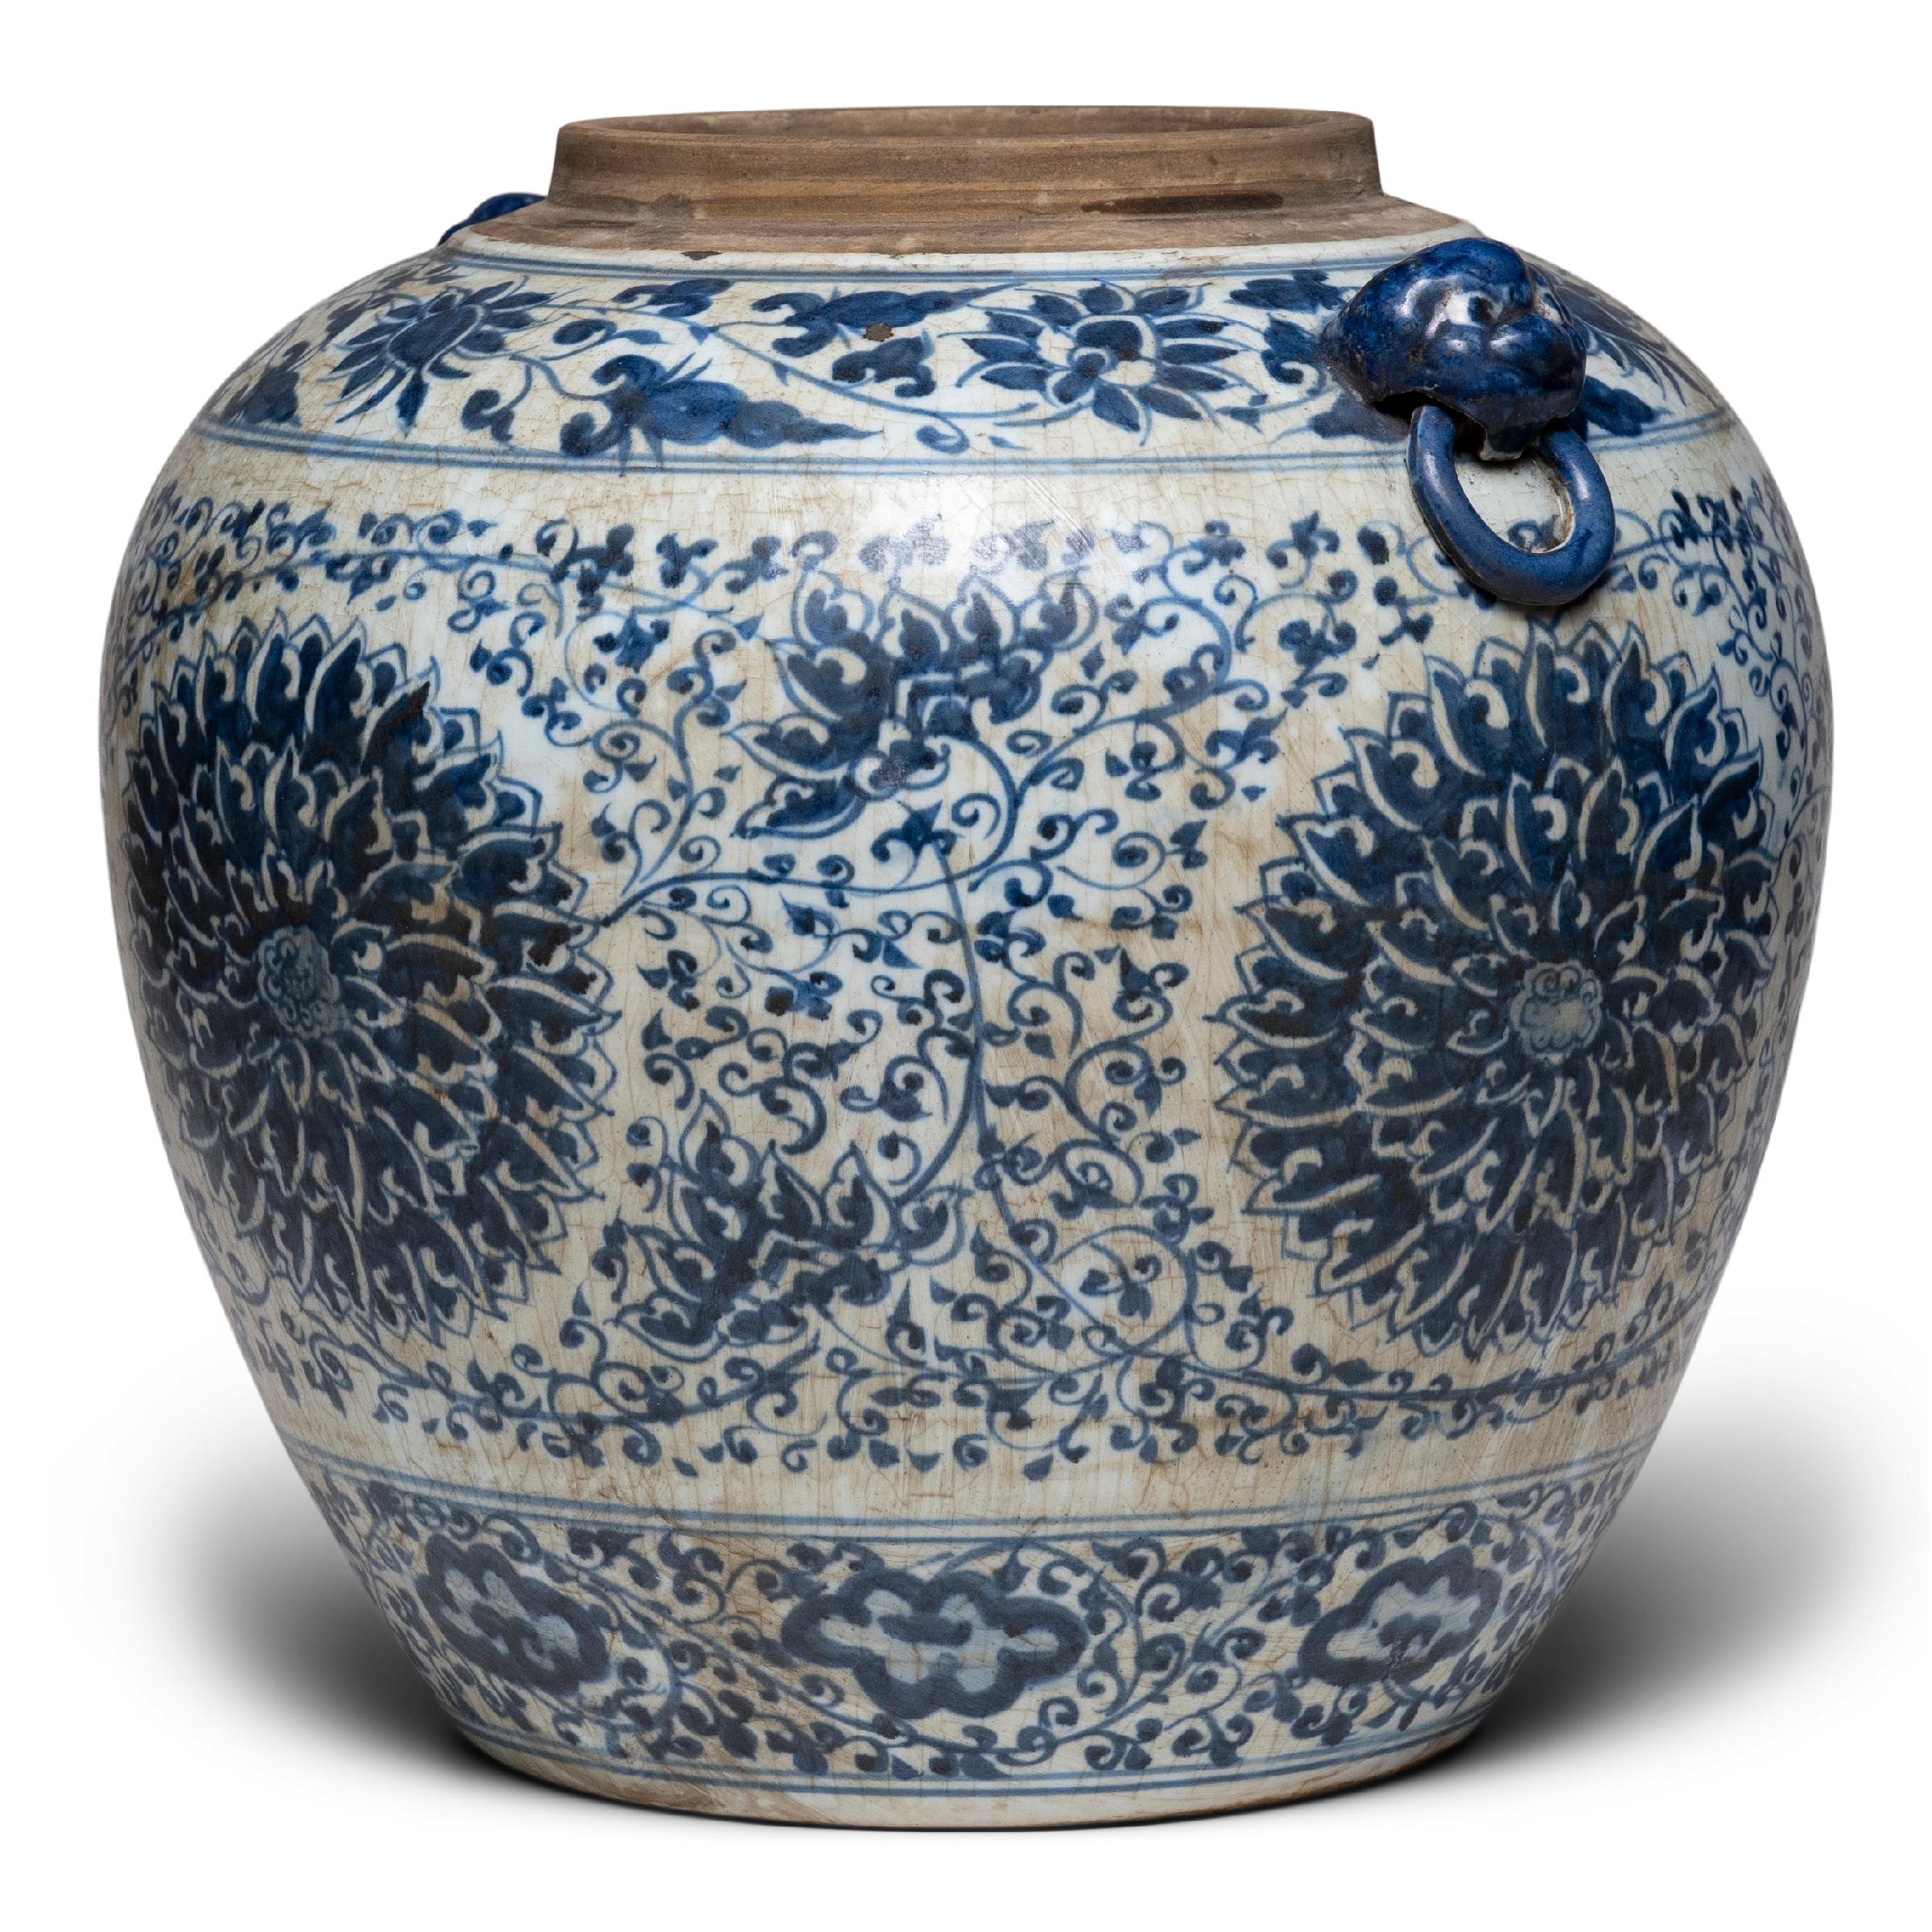 This large, tapered ginger jar continues a centuries-old tradition of Chinese blue-and-white porcelain ware. Painted with expressive brushwork, the jar is festooned with trailing vines and flower blossoms, densely patterned around large